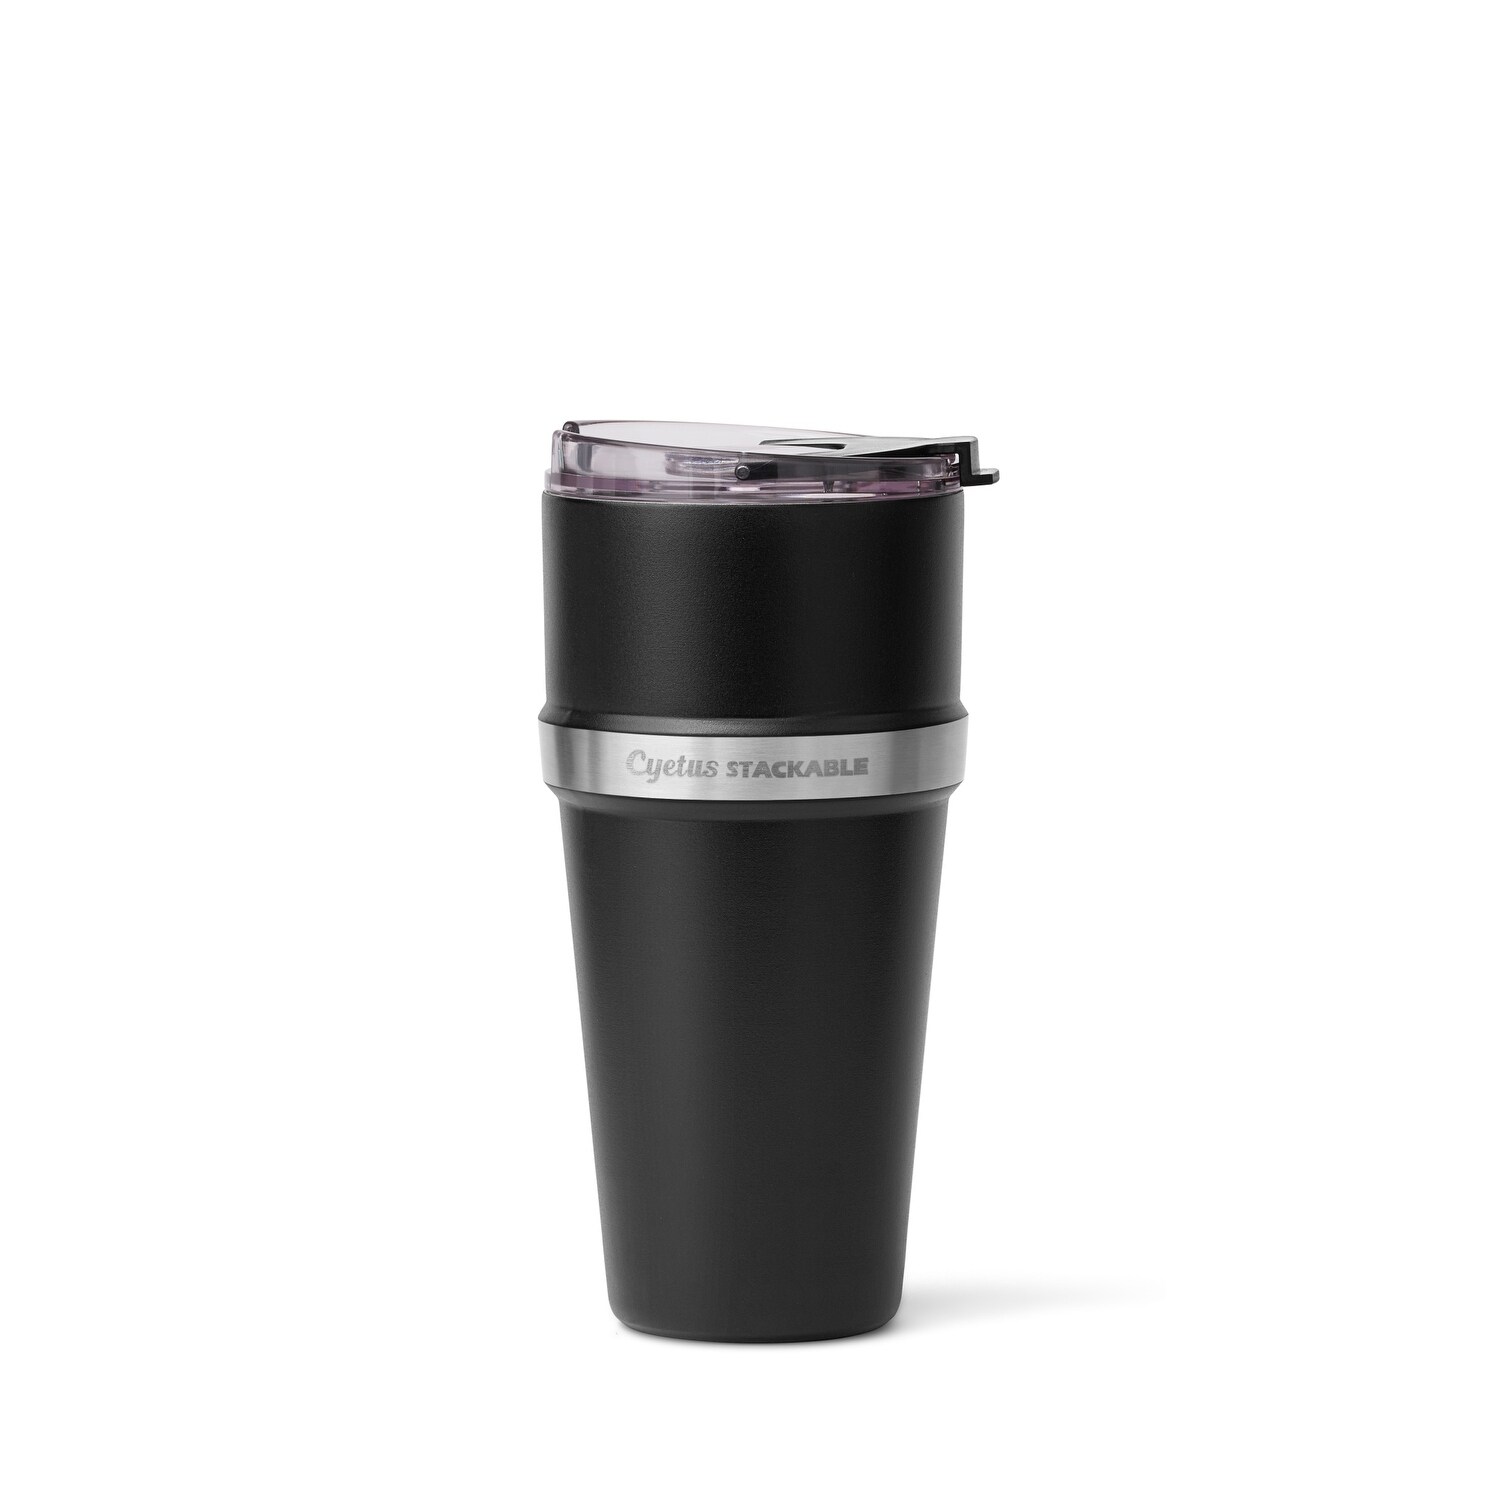 https://ak1.ostkcdn.com/images/products/is/images/direct/bdc1443f3bed9d673c6d21db25c433755f63cb86/Cyetus-Stainless-Steel-Vacuum-Insulated-Stackable-Coffee-Tumbler-Cup---2-Piece.jpg